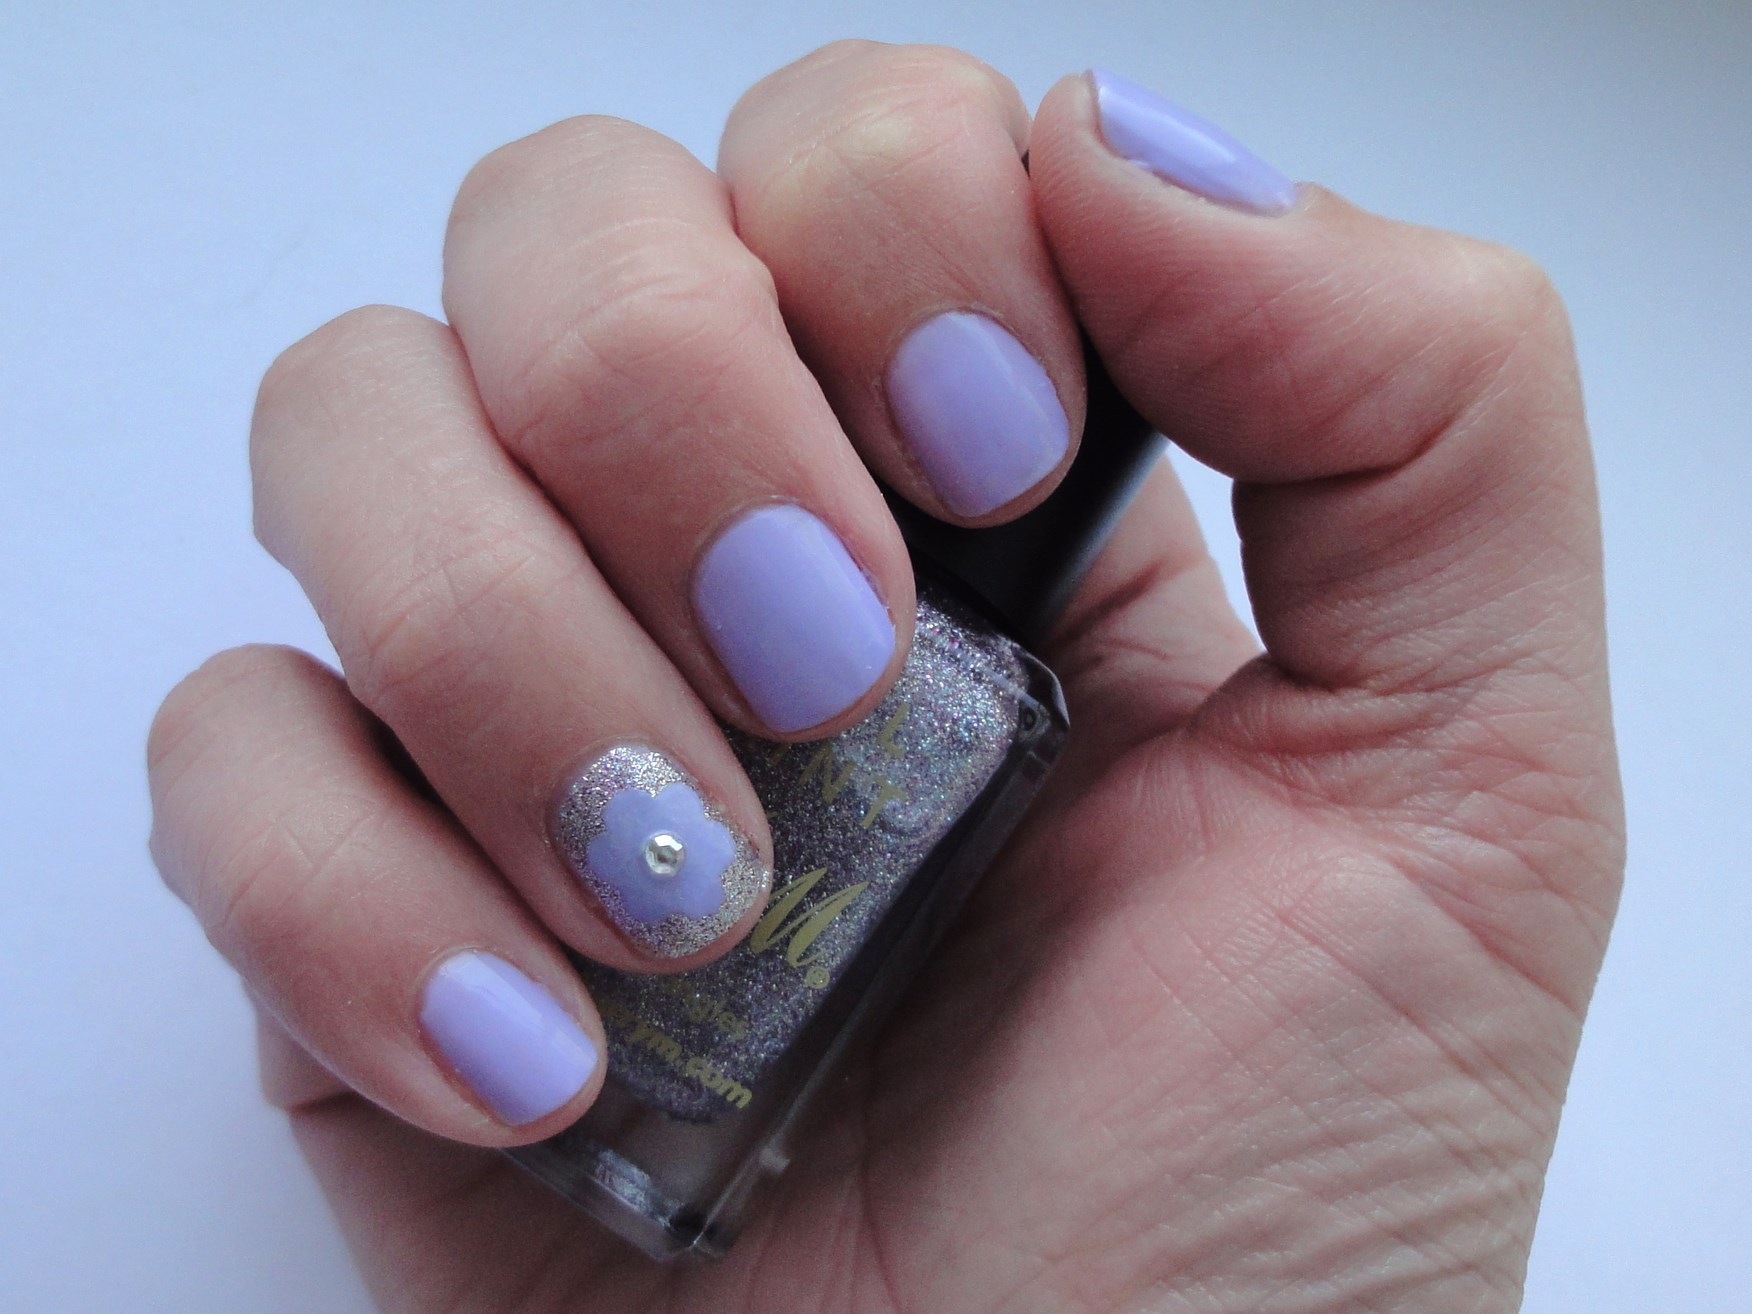 1. "Lilac and Gold Nail Design on Tumblr" - wide 7